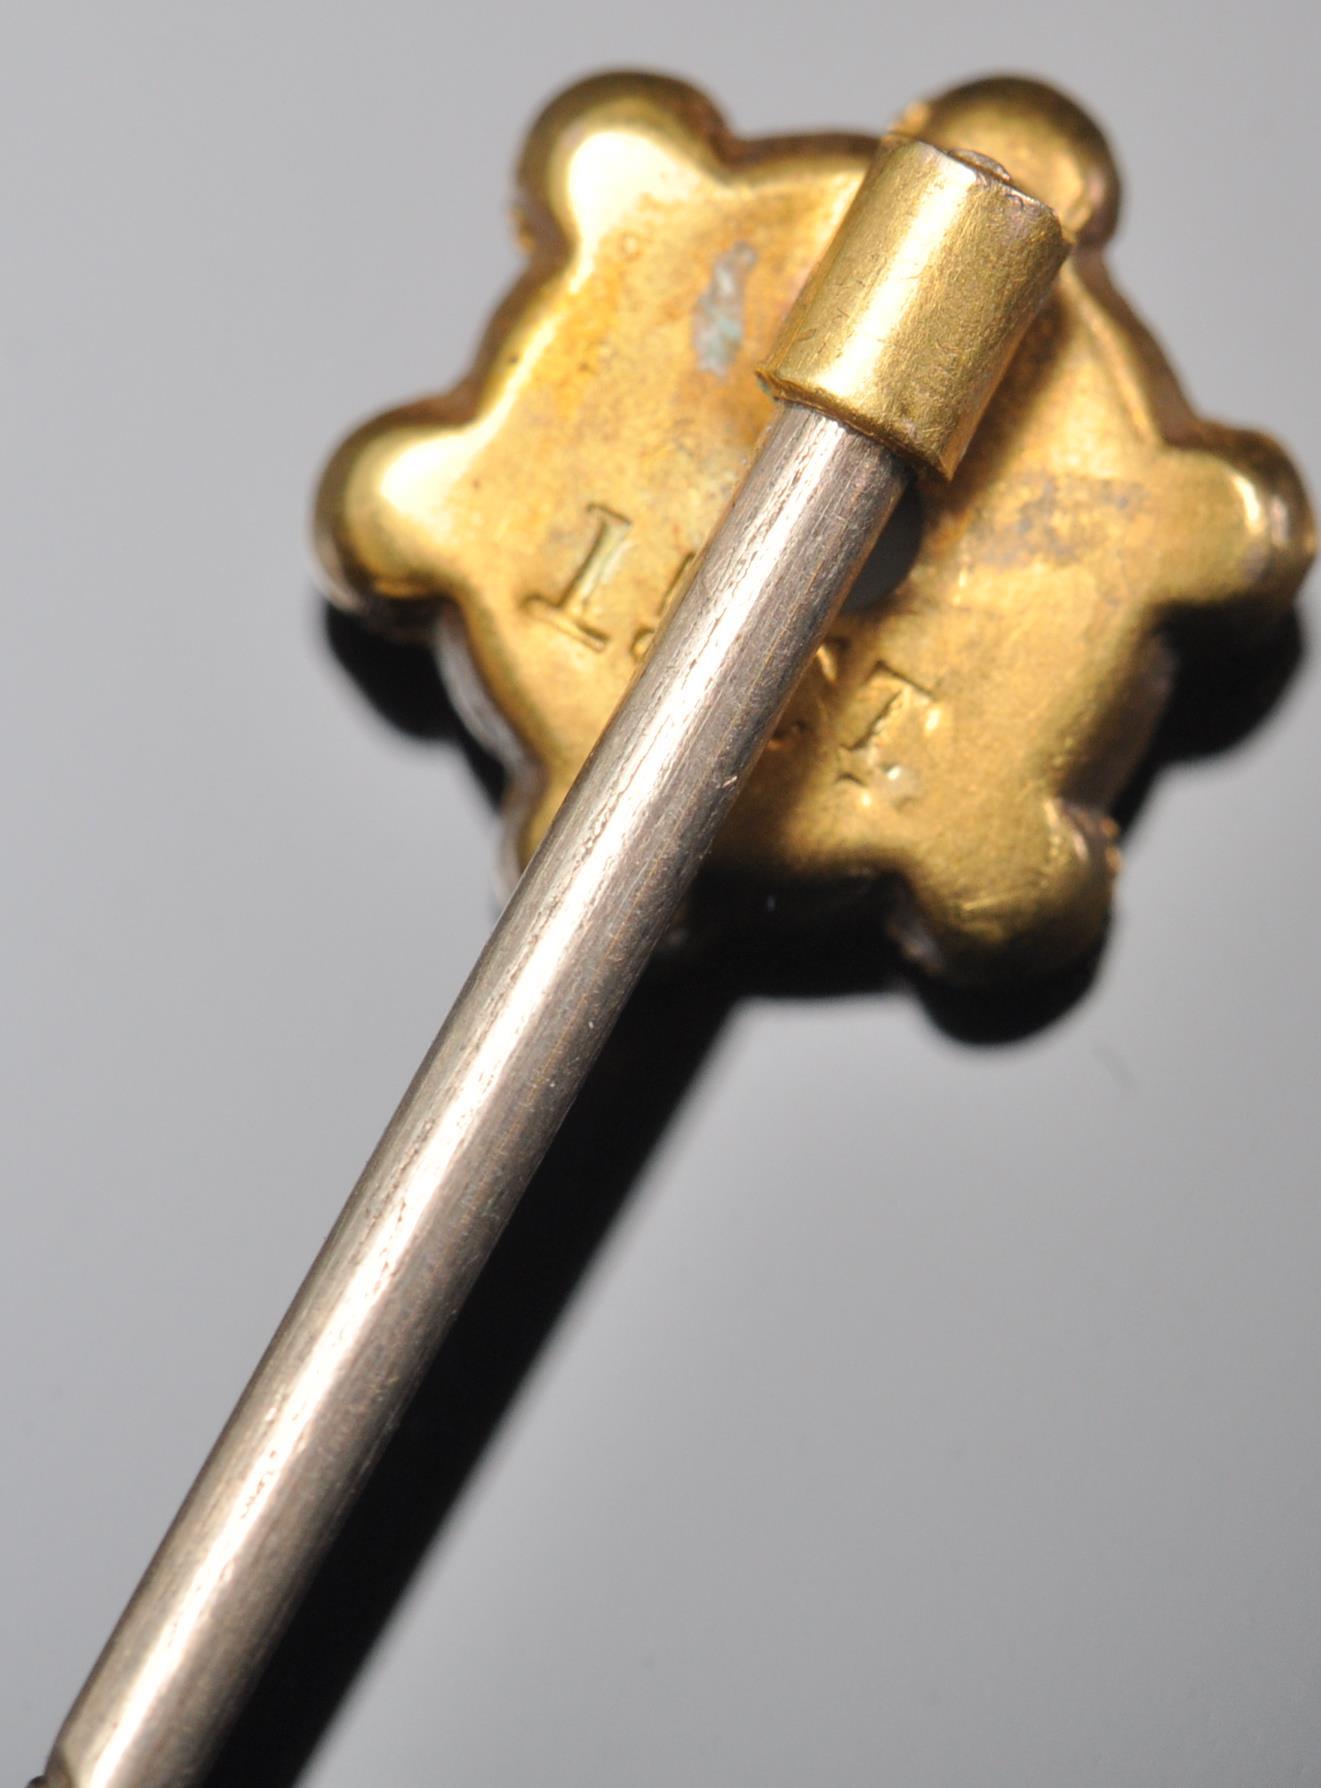 A 9ct gold toped tie pin having wire work and ball finial decoration set with a single diamond chip. - Image 5 of 5